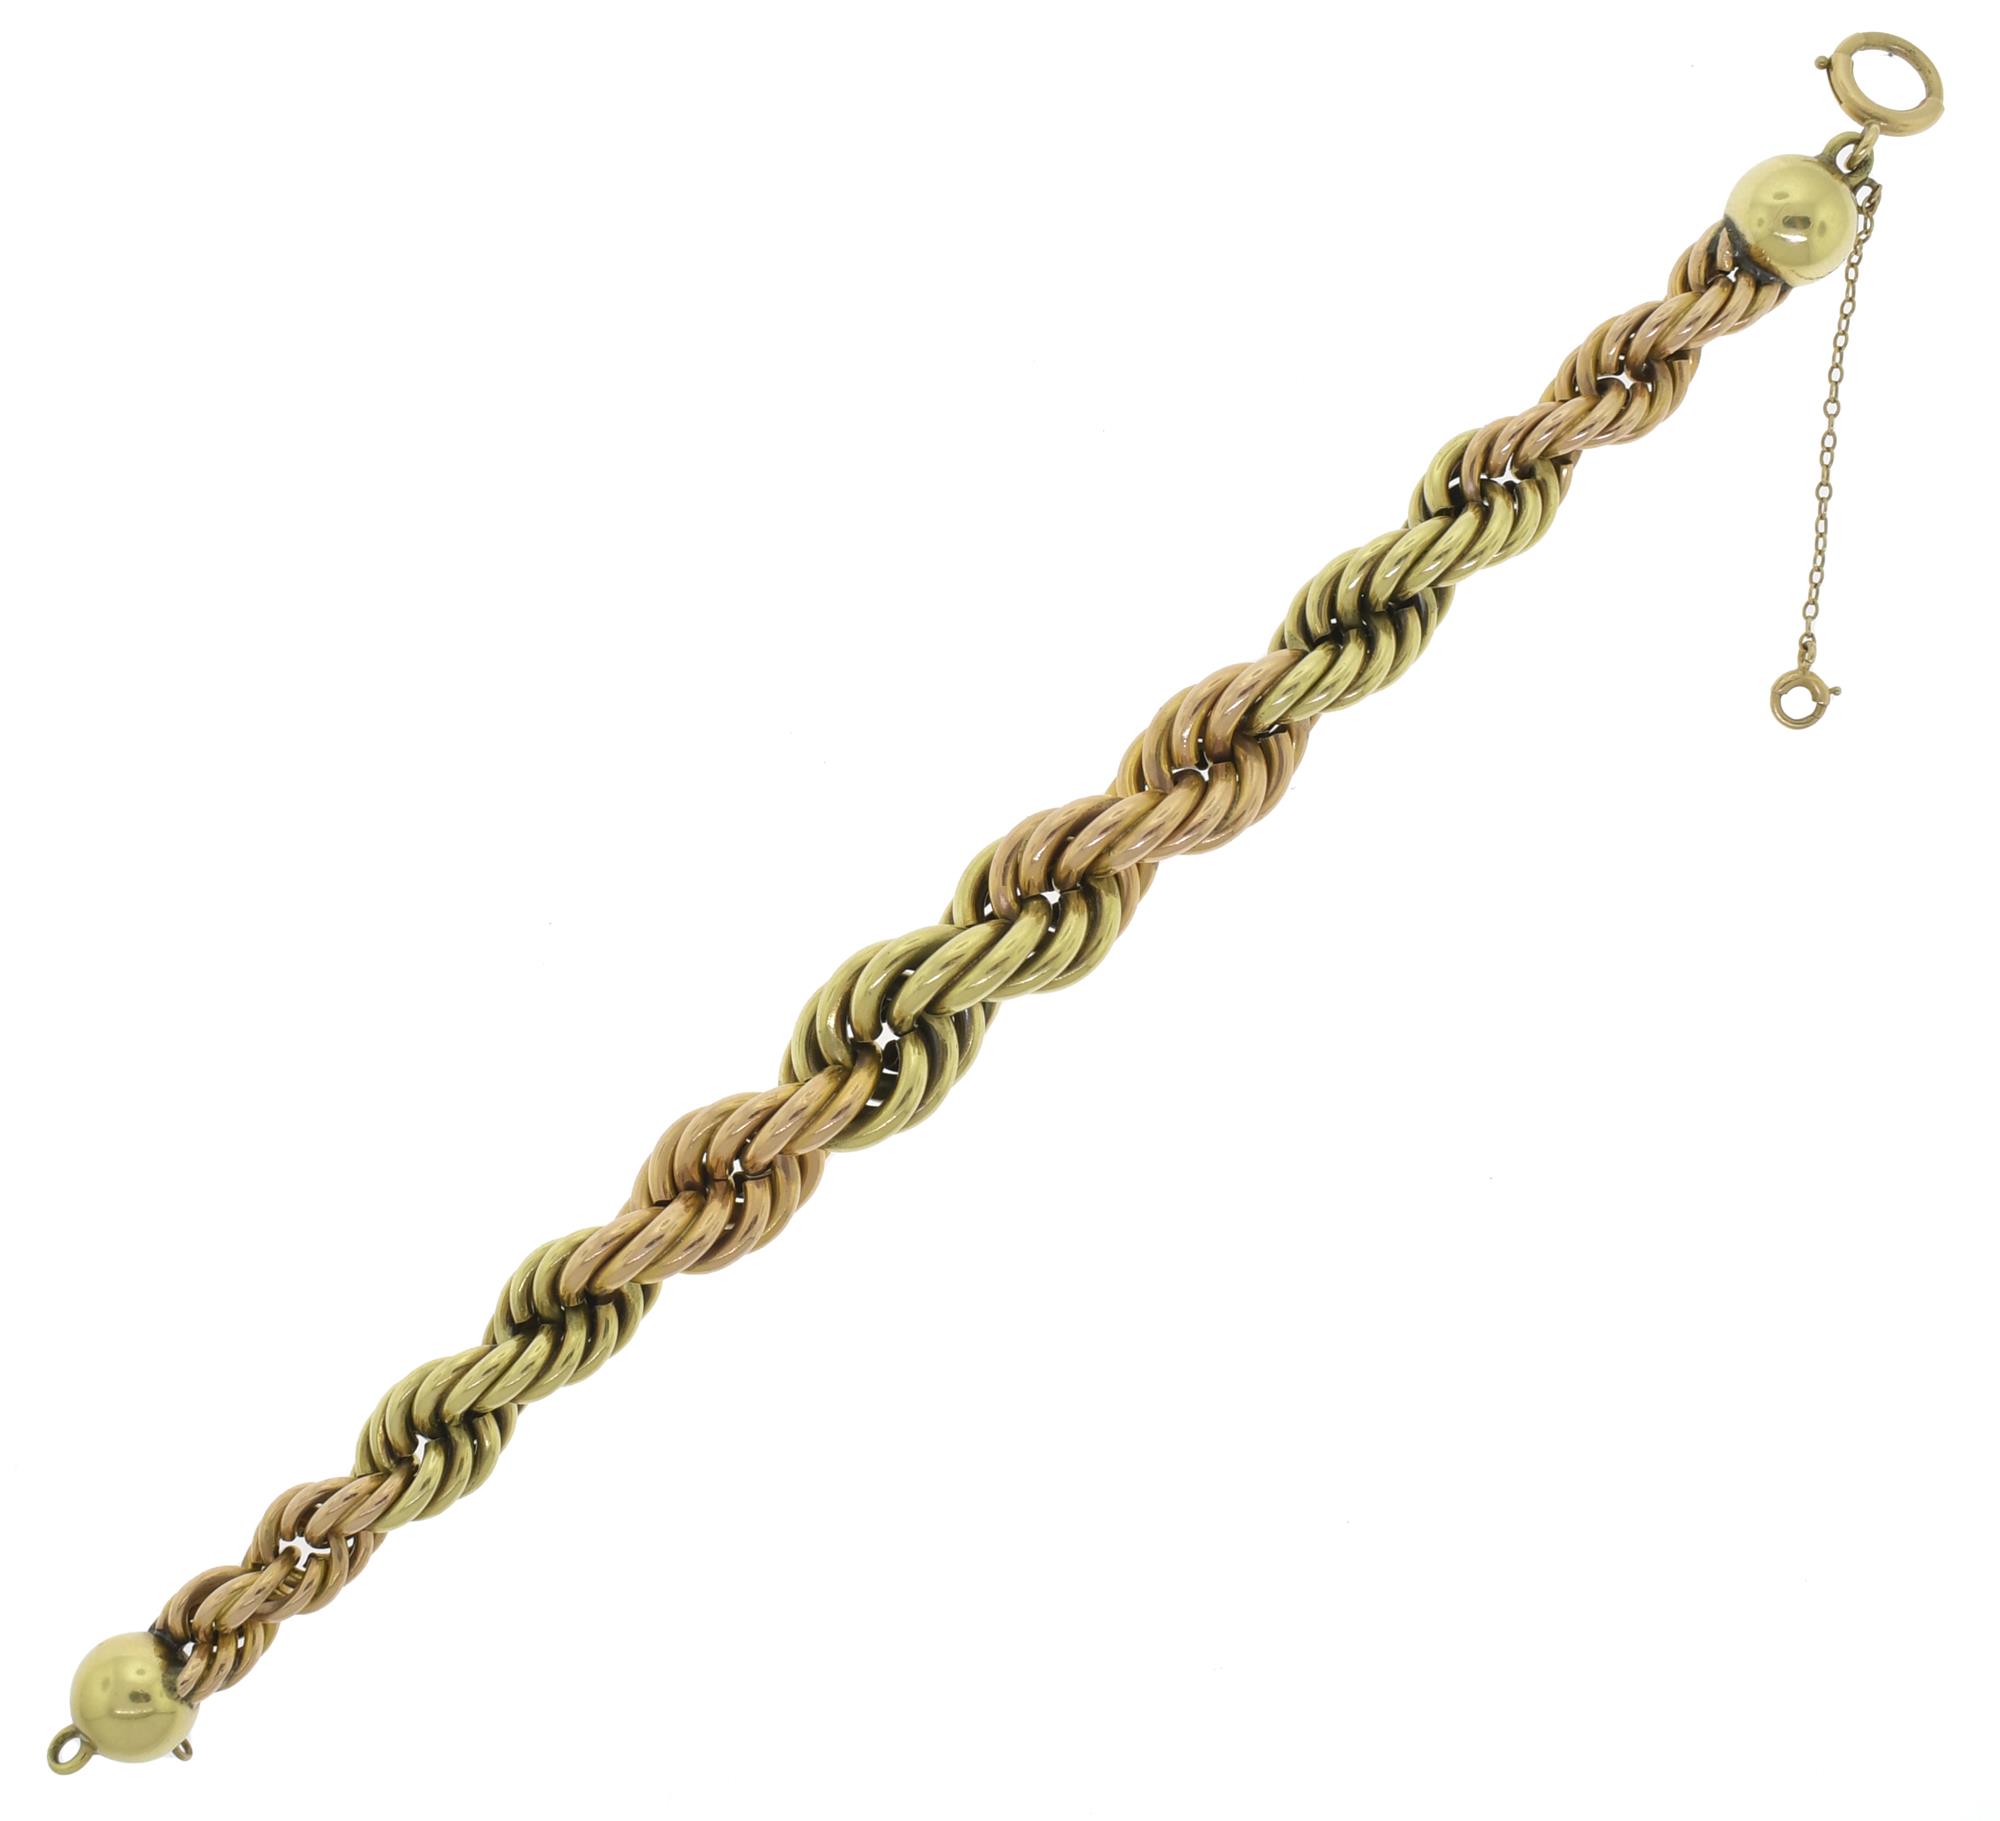 14K YELLOW AND ROSE GOLD ROPE BRACELET.